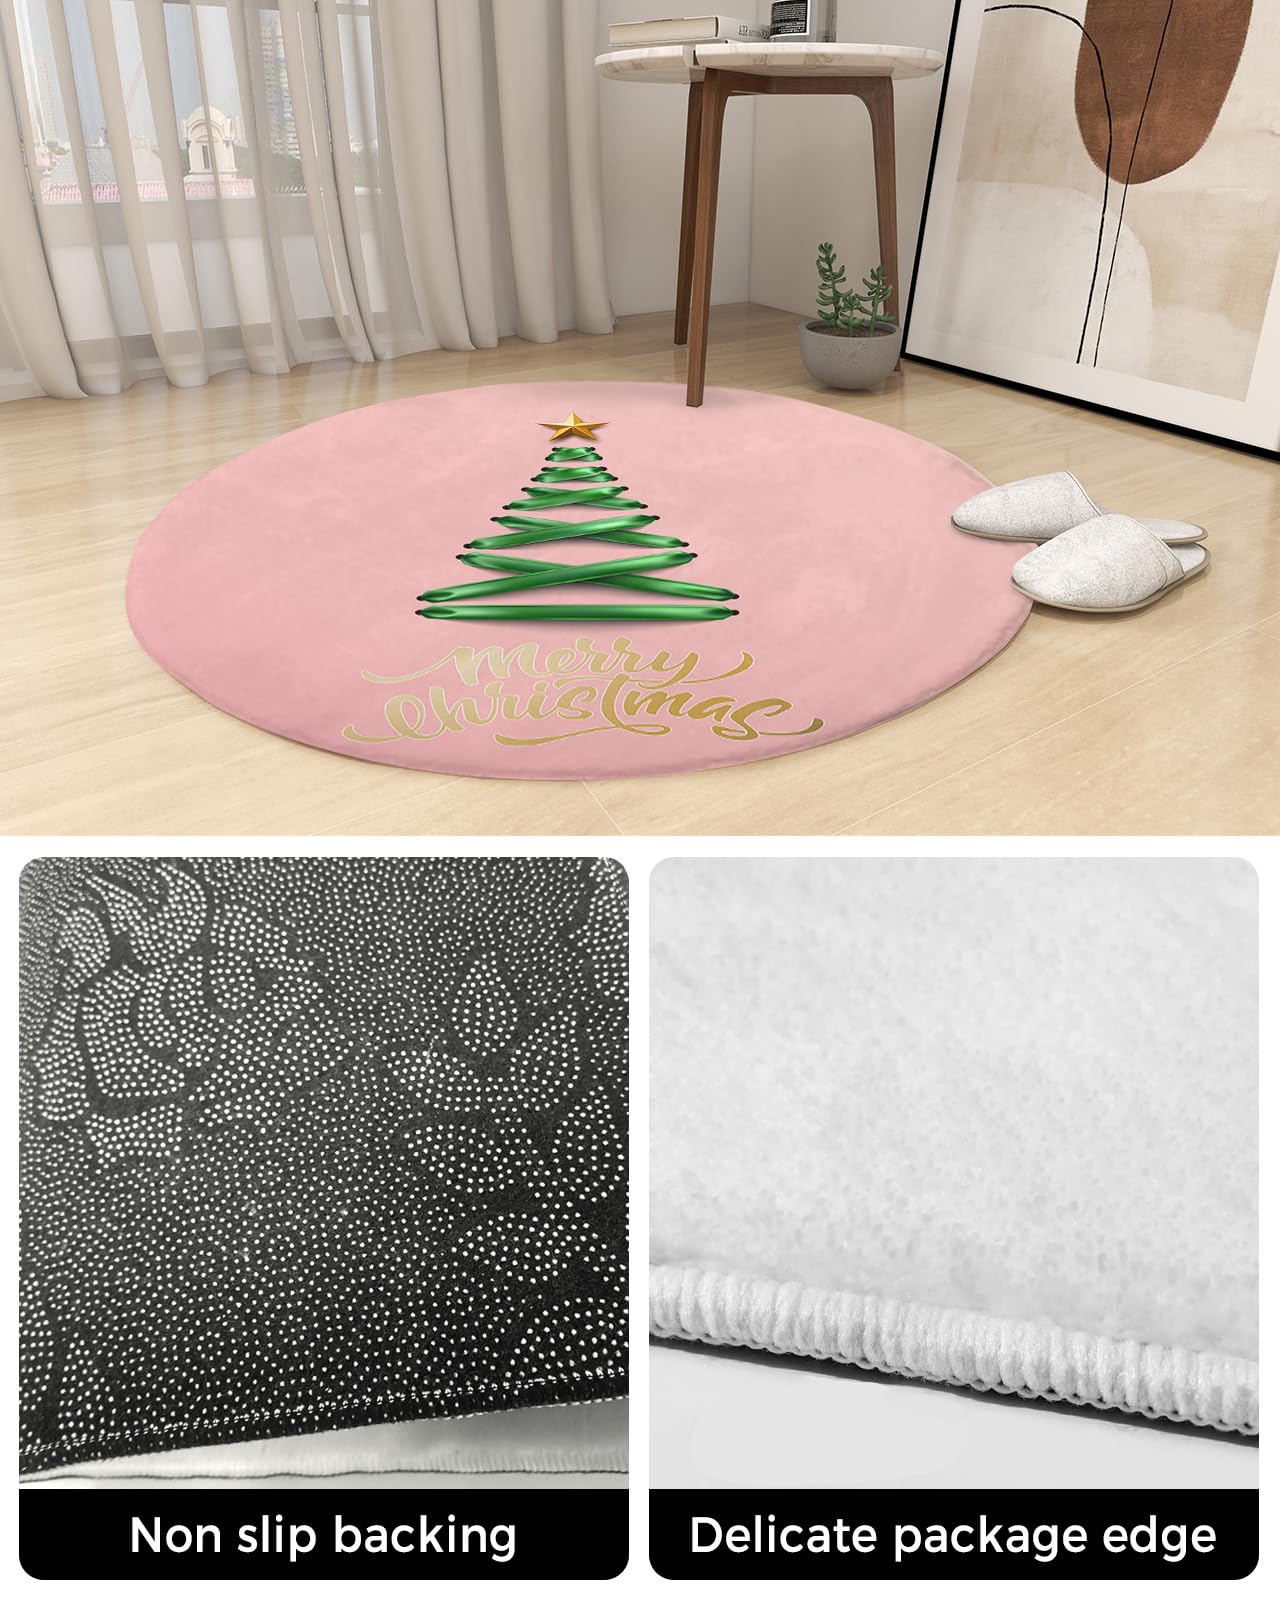 Christmas Fluffy Round Area Rug Carpets 5ft,Plush Shaggy Carpet Soft Circular Rugs,Non-Slip Fuzzy Accent Floor Mat for Living Room Bedroom Nursery Home Decor Geometric Abstract Contemporary Tree Pink